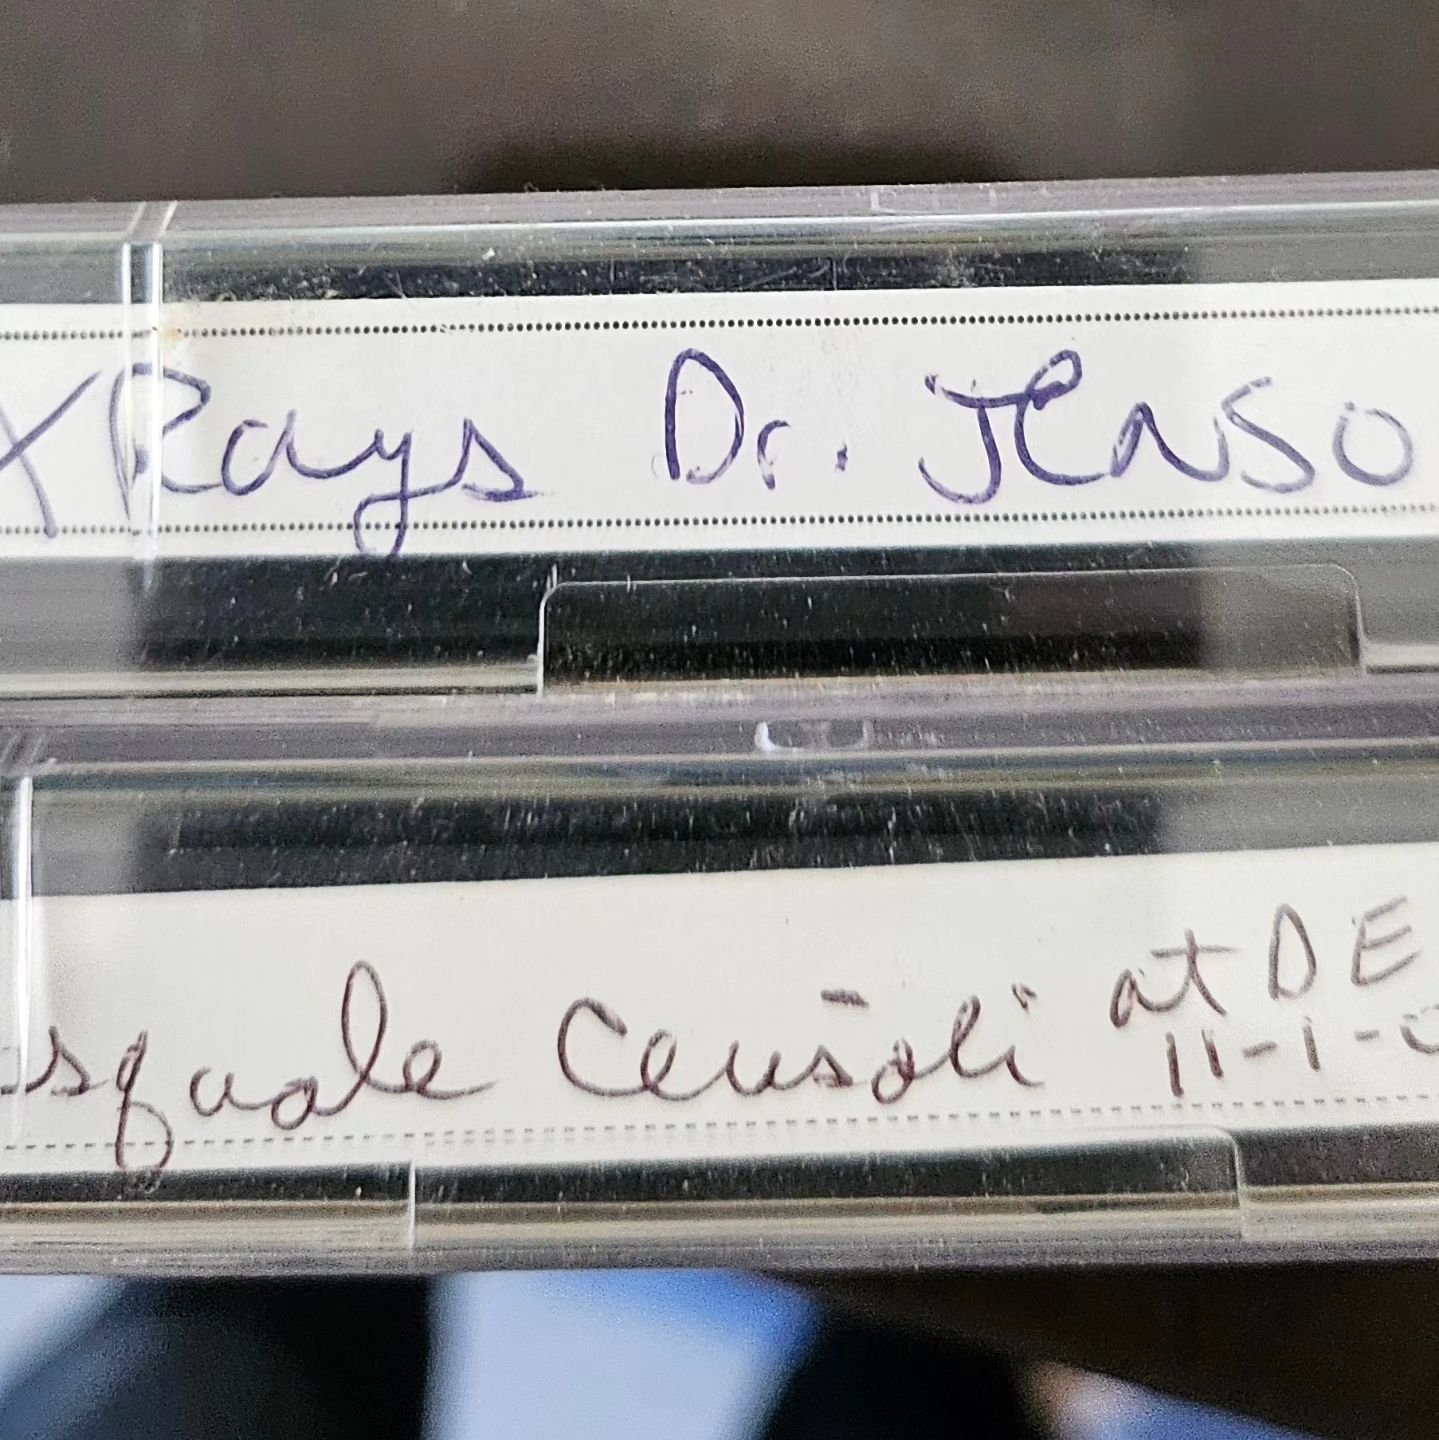 I just found 2 amazing gems on HI-8 video tapes. Dr Clarence Jenson was my Toggle mentor who taught me BJ Palmers Xray analysis and I recorded it and laminated our notes🤩. Also I have Dr Pasquale Cersoli speaking at DE in 2003💪🧠🤩. I need to find 